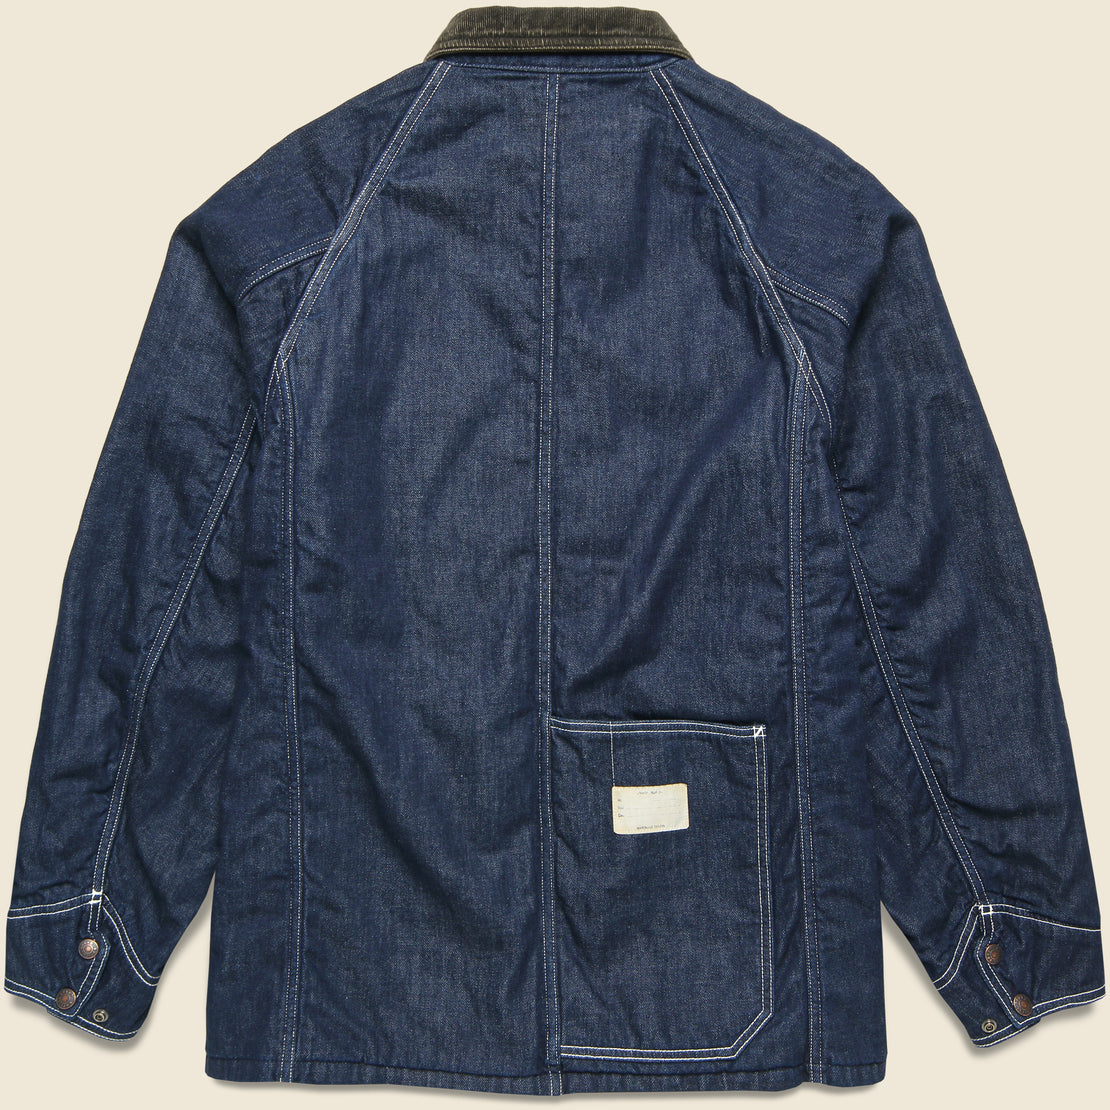 8oz Denim Lined CACTUS Coverall - Indigo - Kapital - STAG Provisions - Outerwear - Coat / Jacket